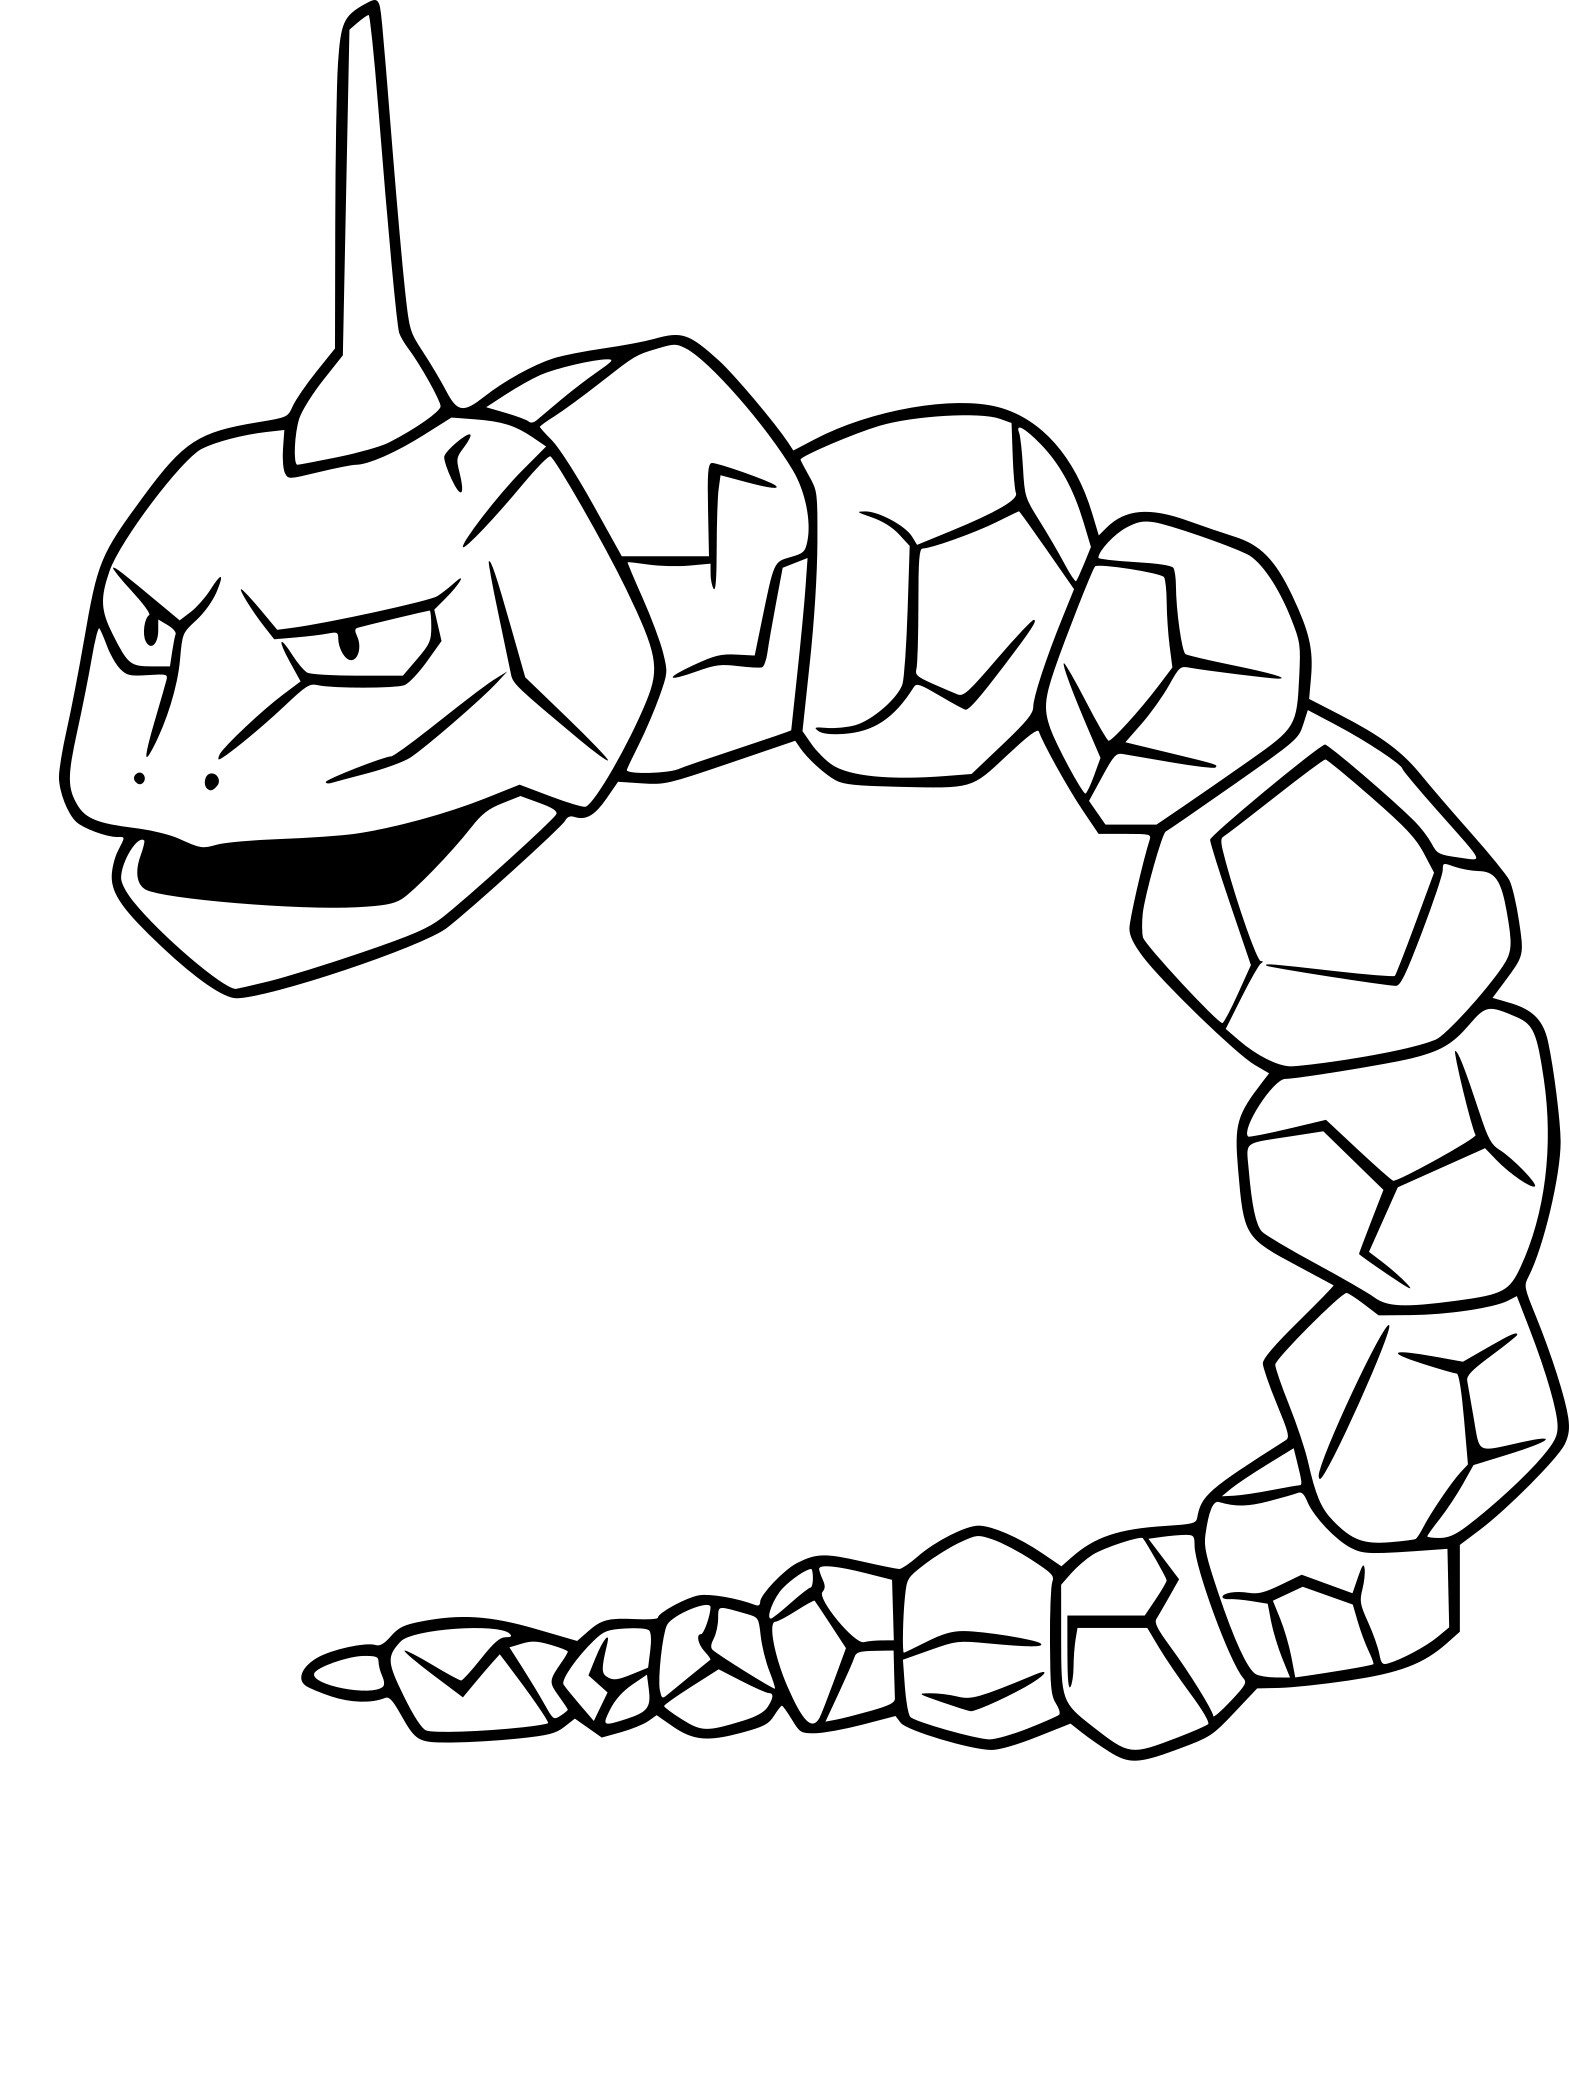 Onix Pokemon Go coloring page - free printable coloring pages on coloori.com